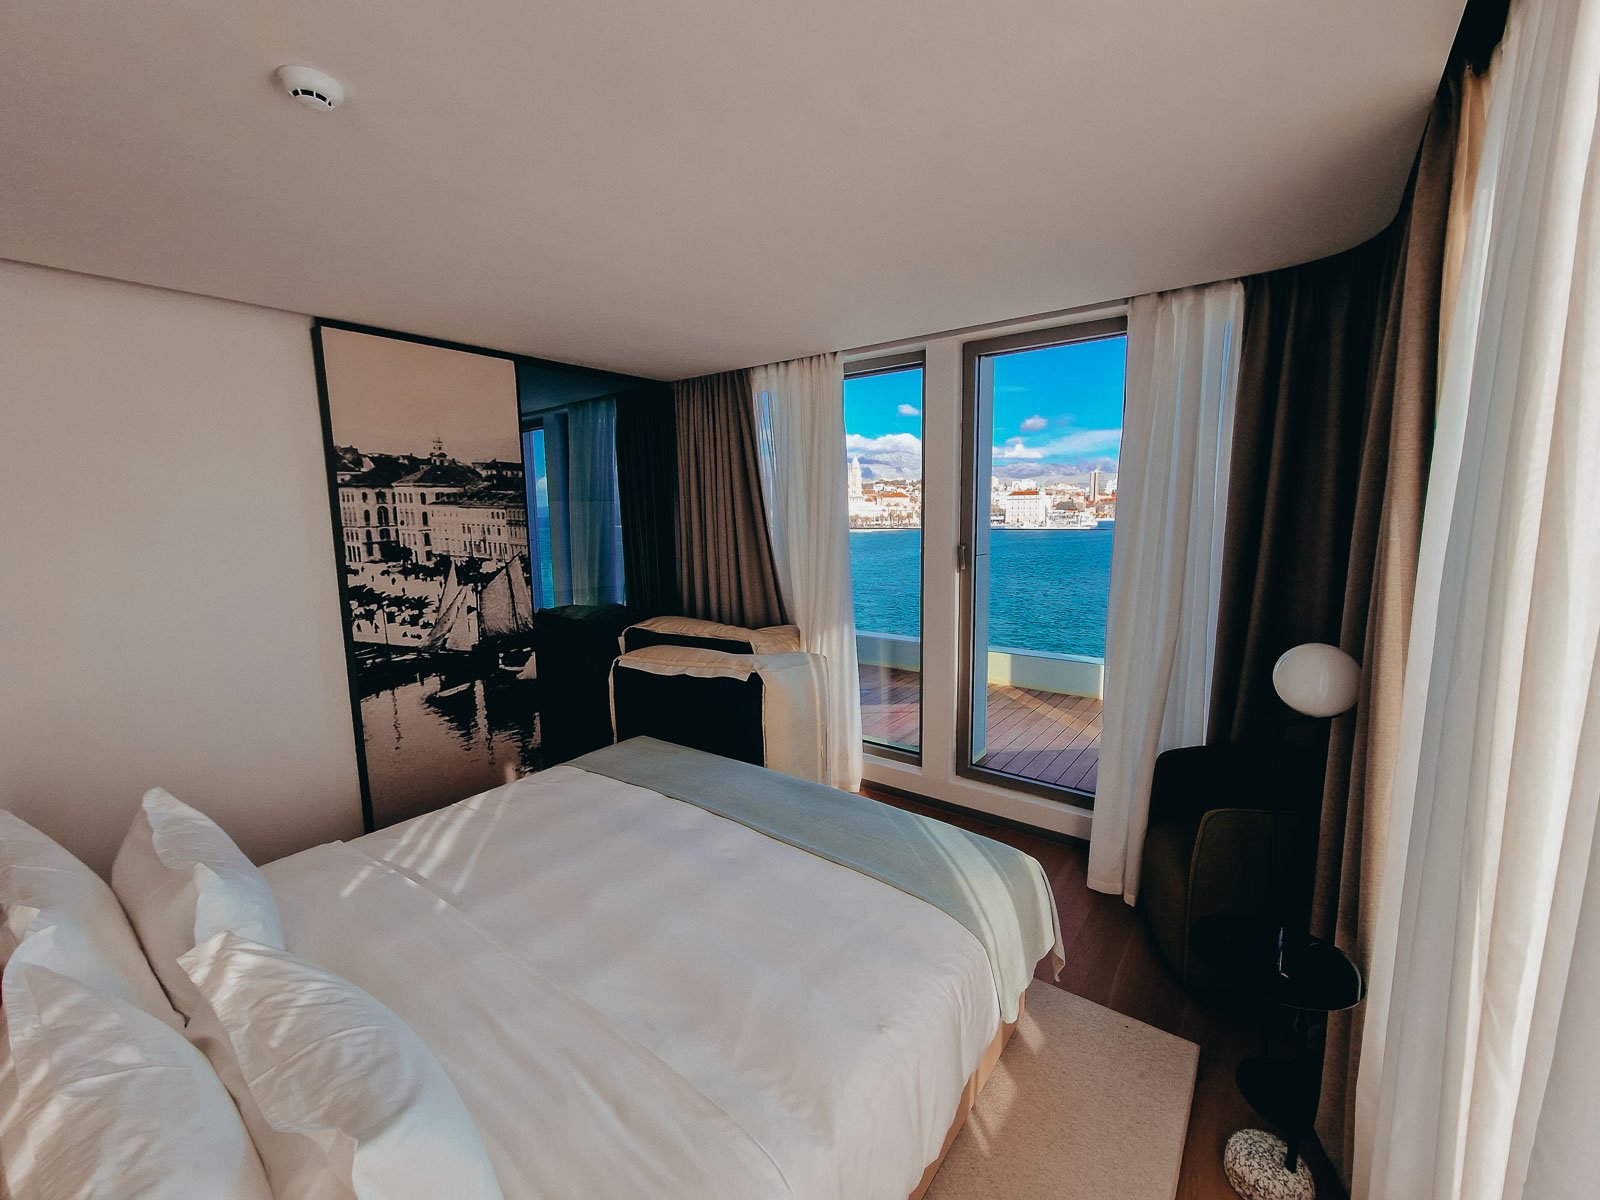 Inside a luxury boutique hotel in Split, a hotel room with views of the sea out of the doors and balcony